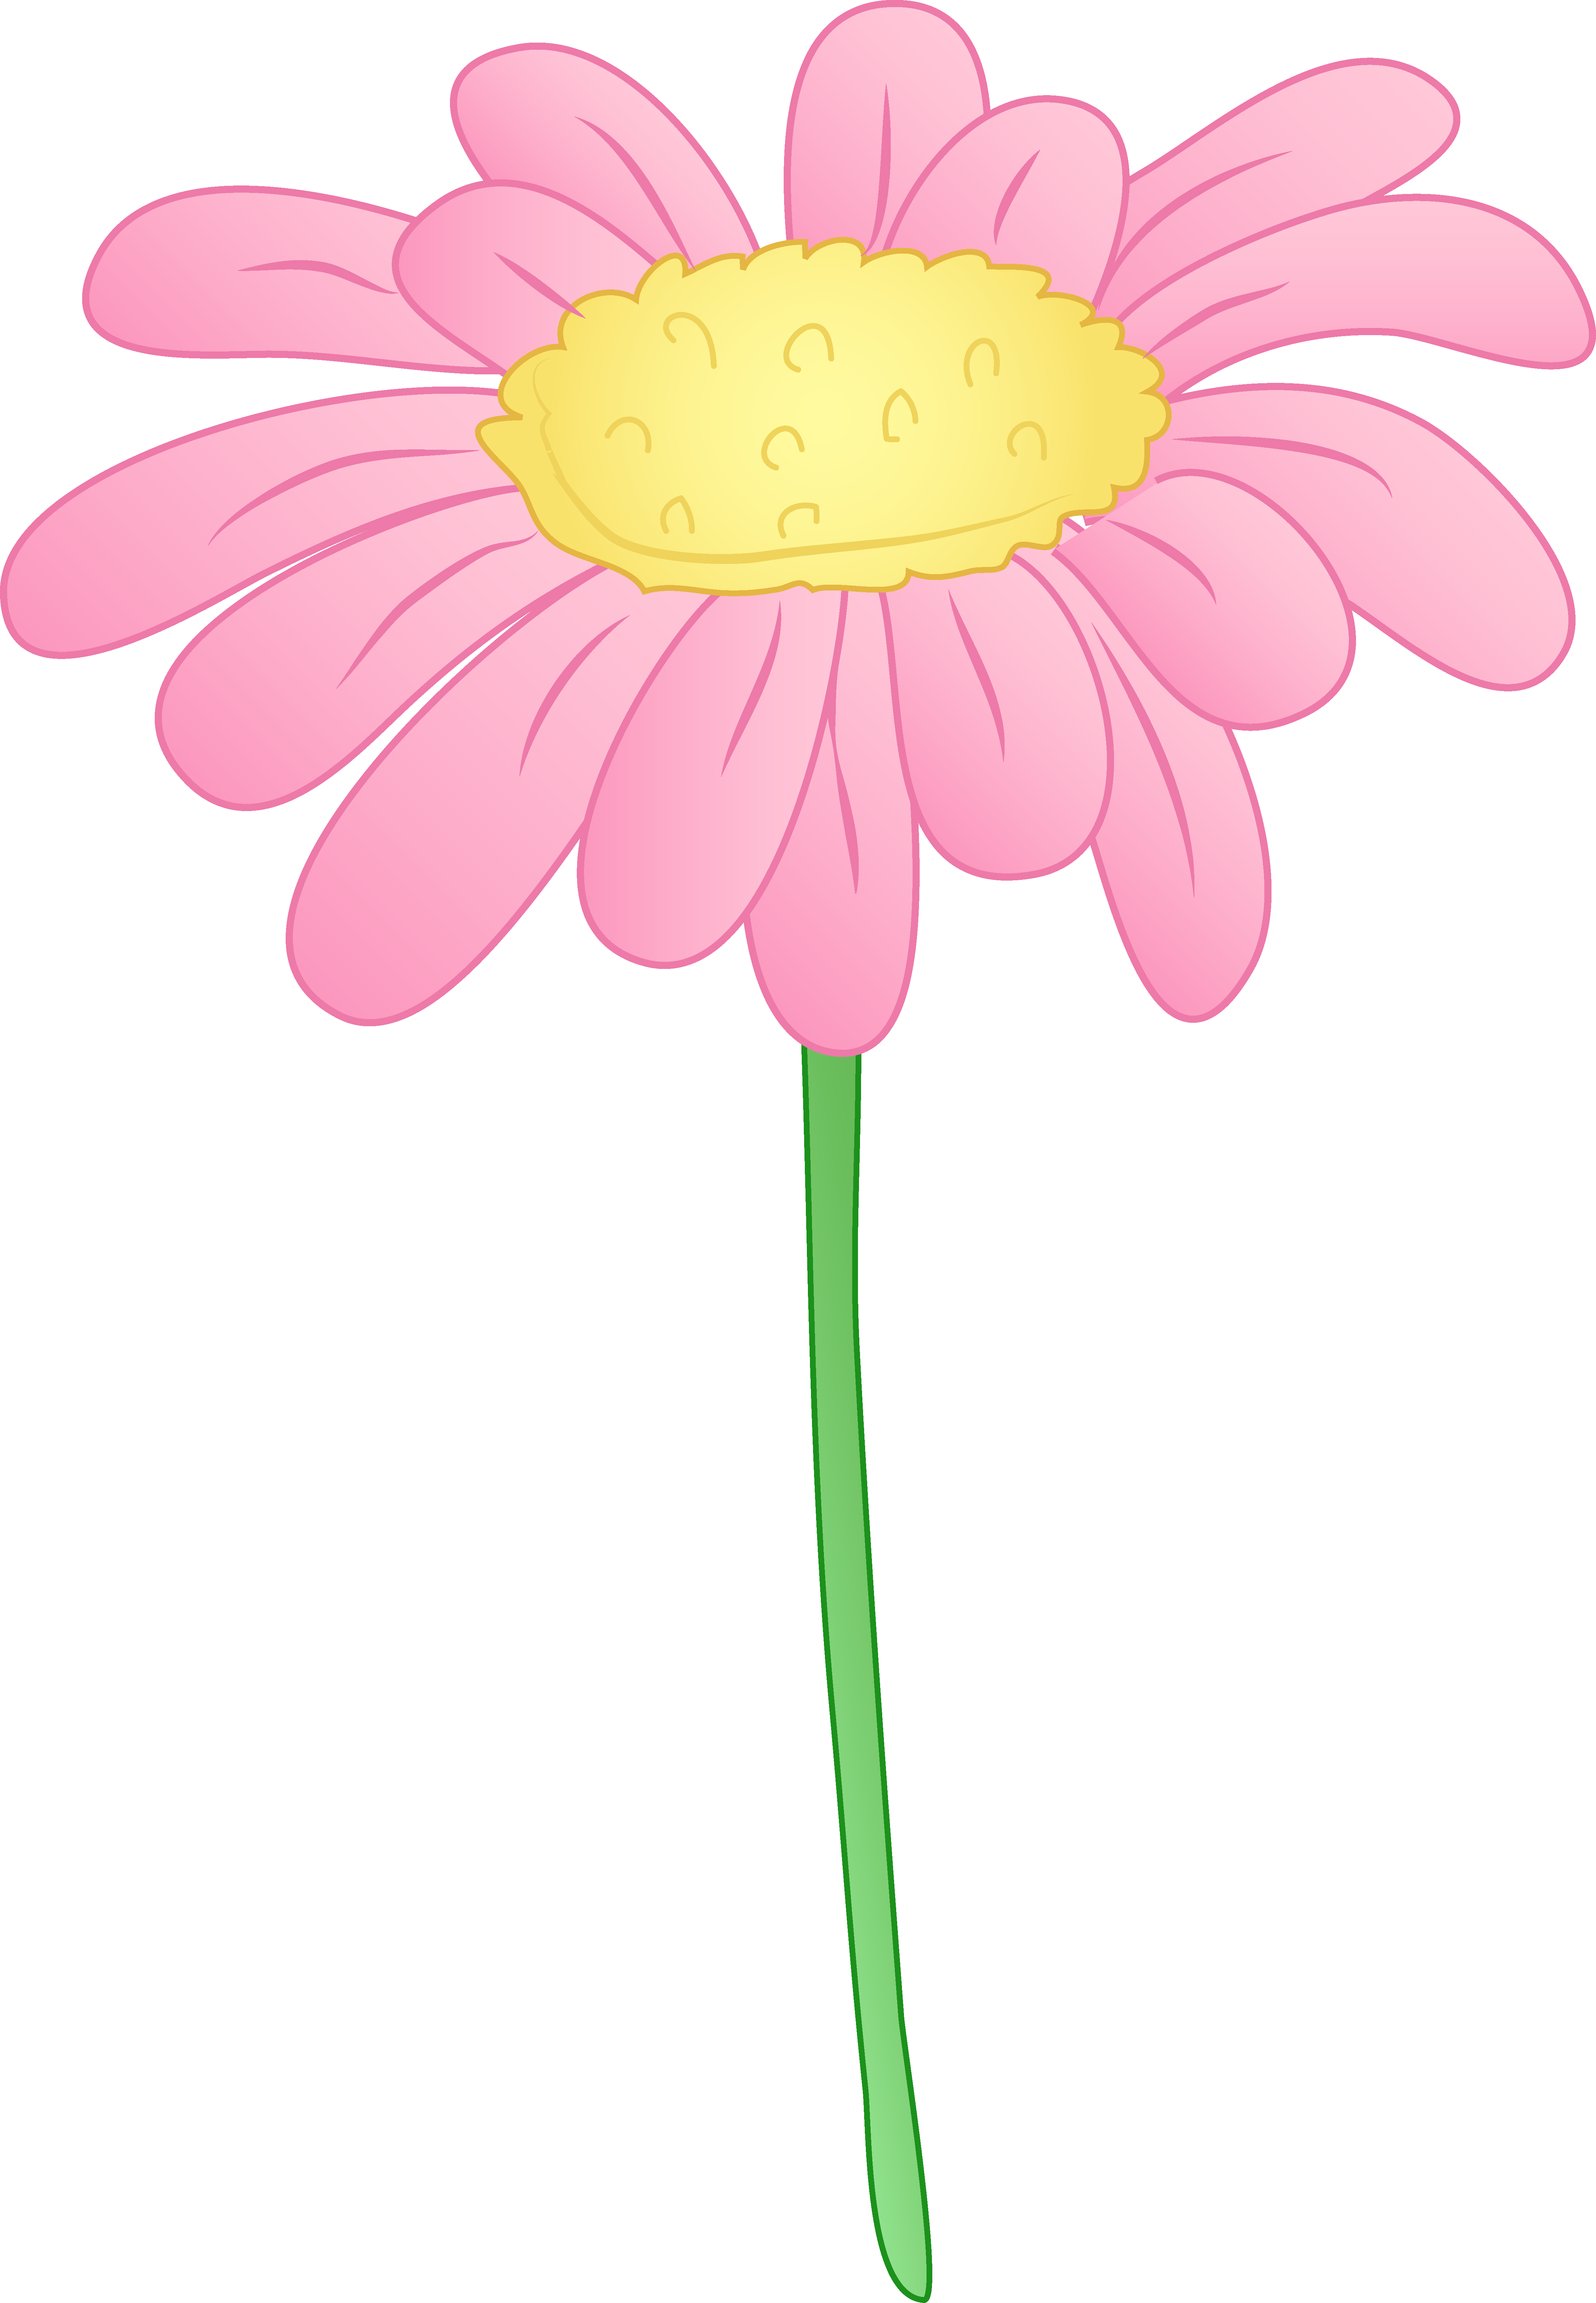 Clip Arts Related To : flower clip art. view all Daisy Flower Cliparts). 